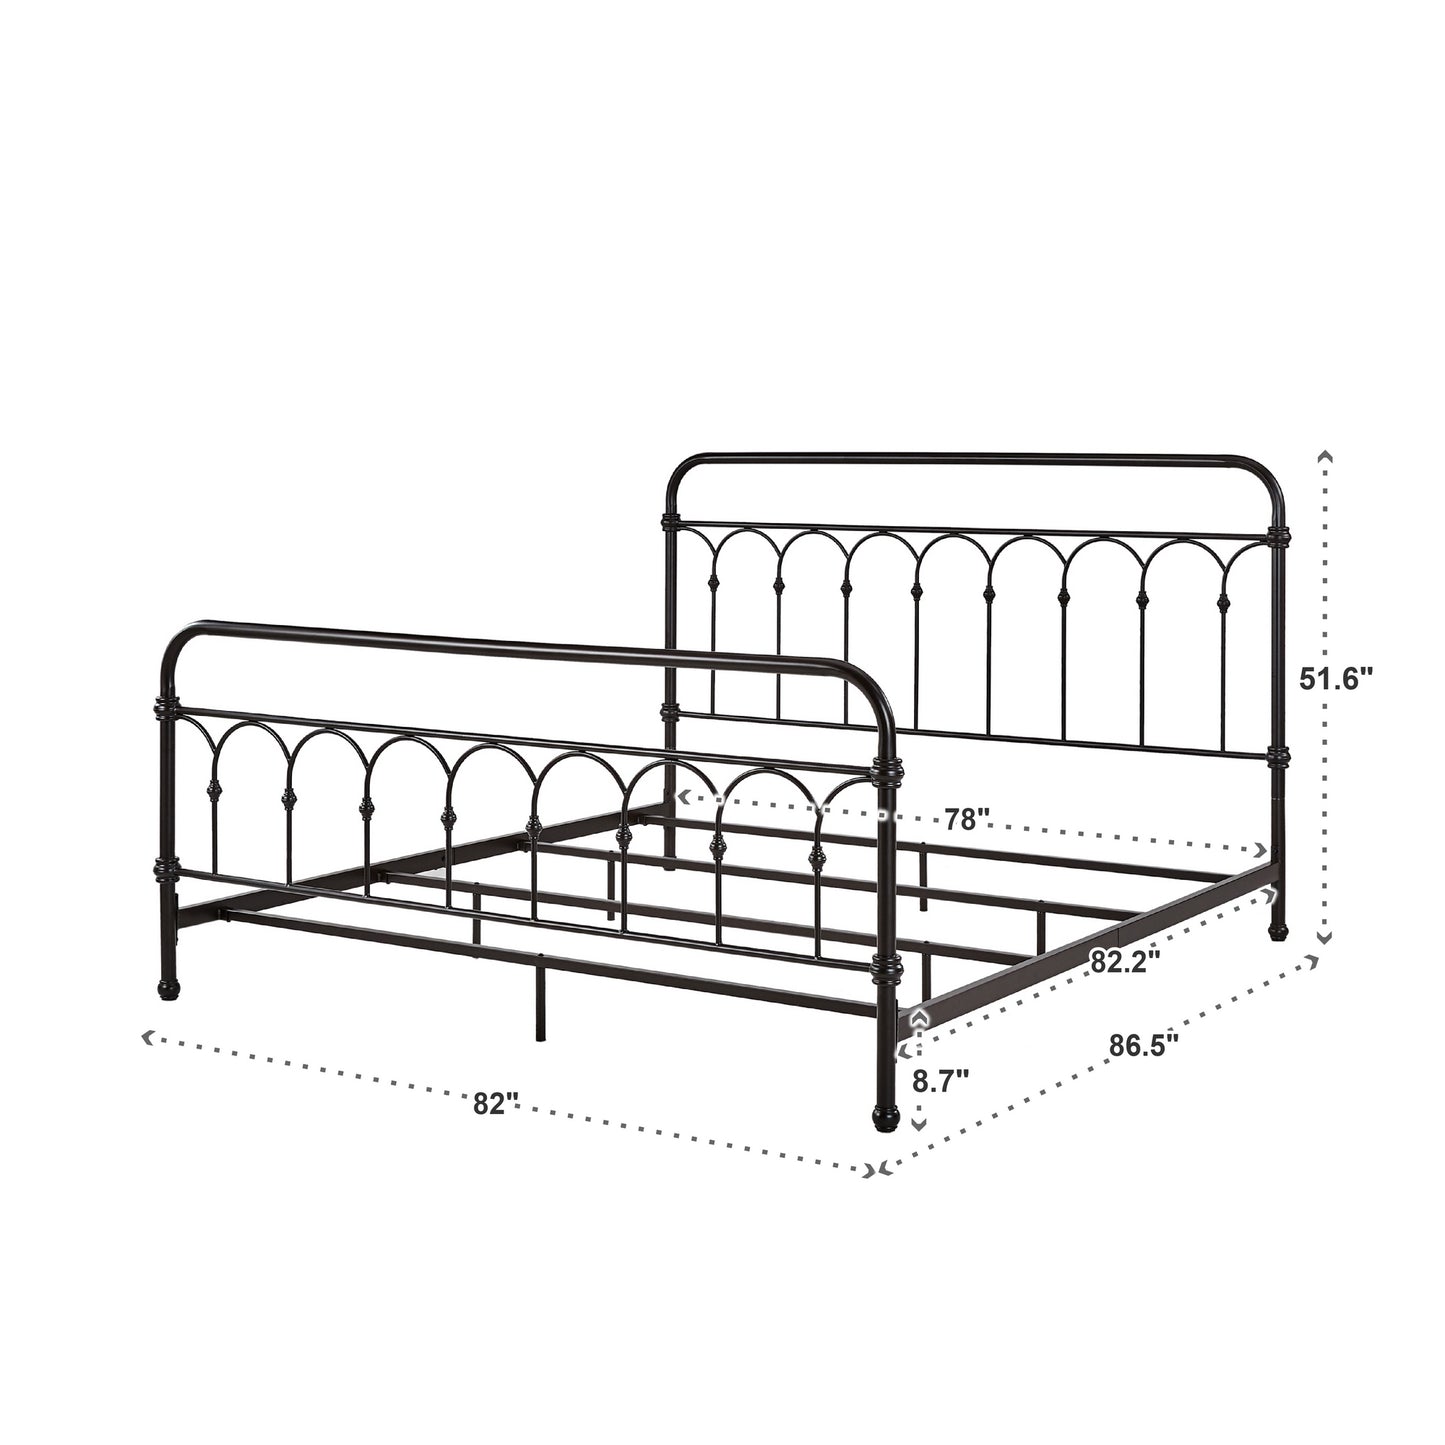 Casted Knot Metal Bed - Dark Bronze Finish, King (King Size)